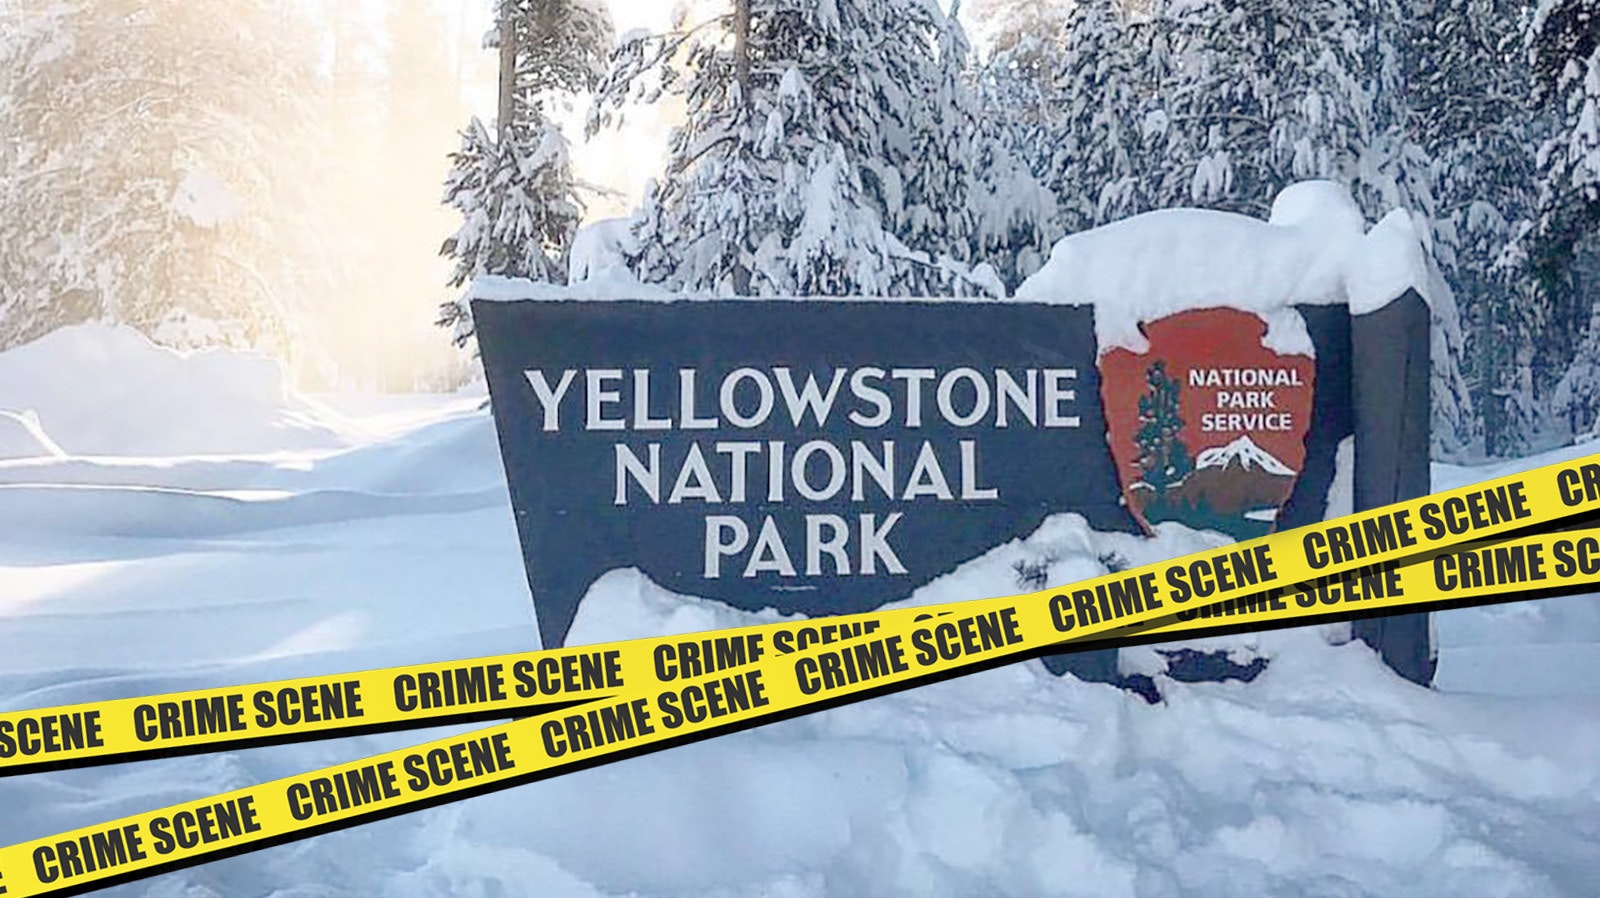 Yellowstone National Park rangers are investigating a woman found dead in a car stuck in a snowbank in the park Saturday.